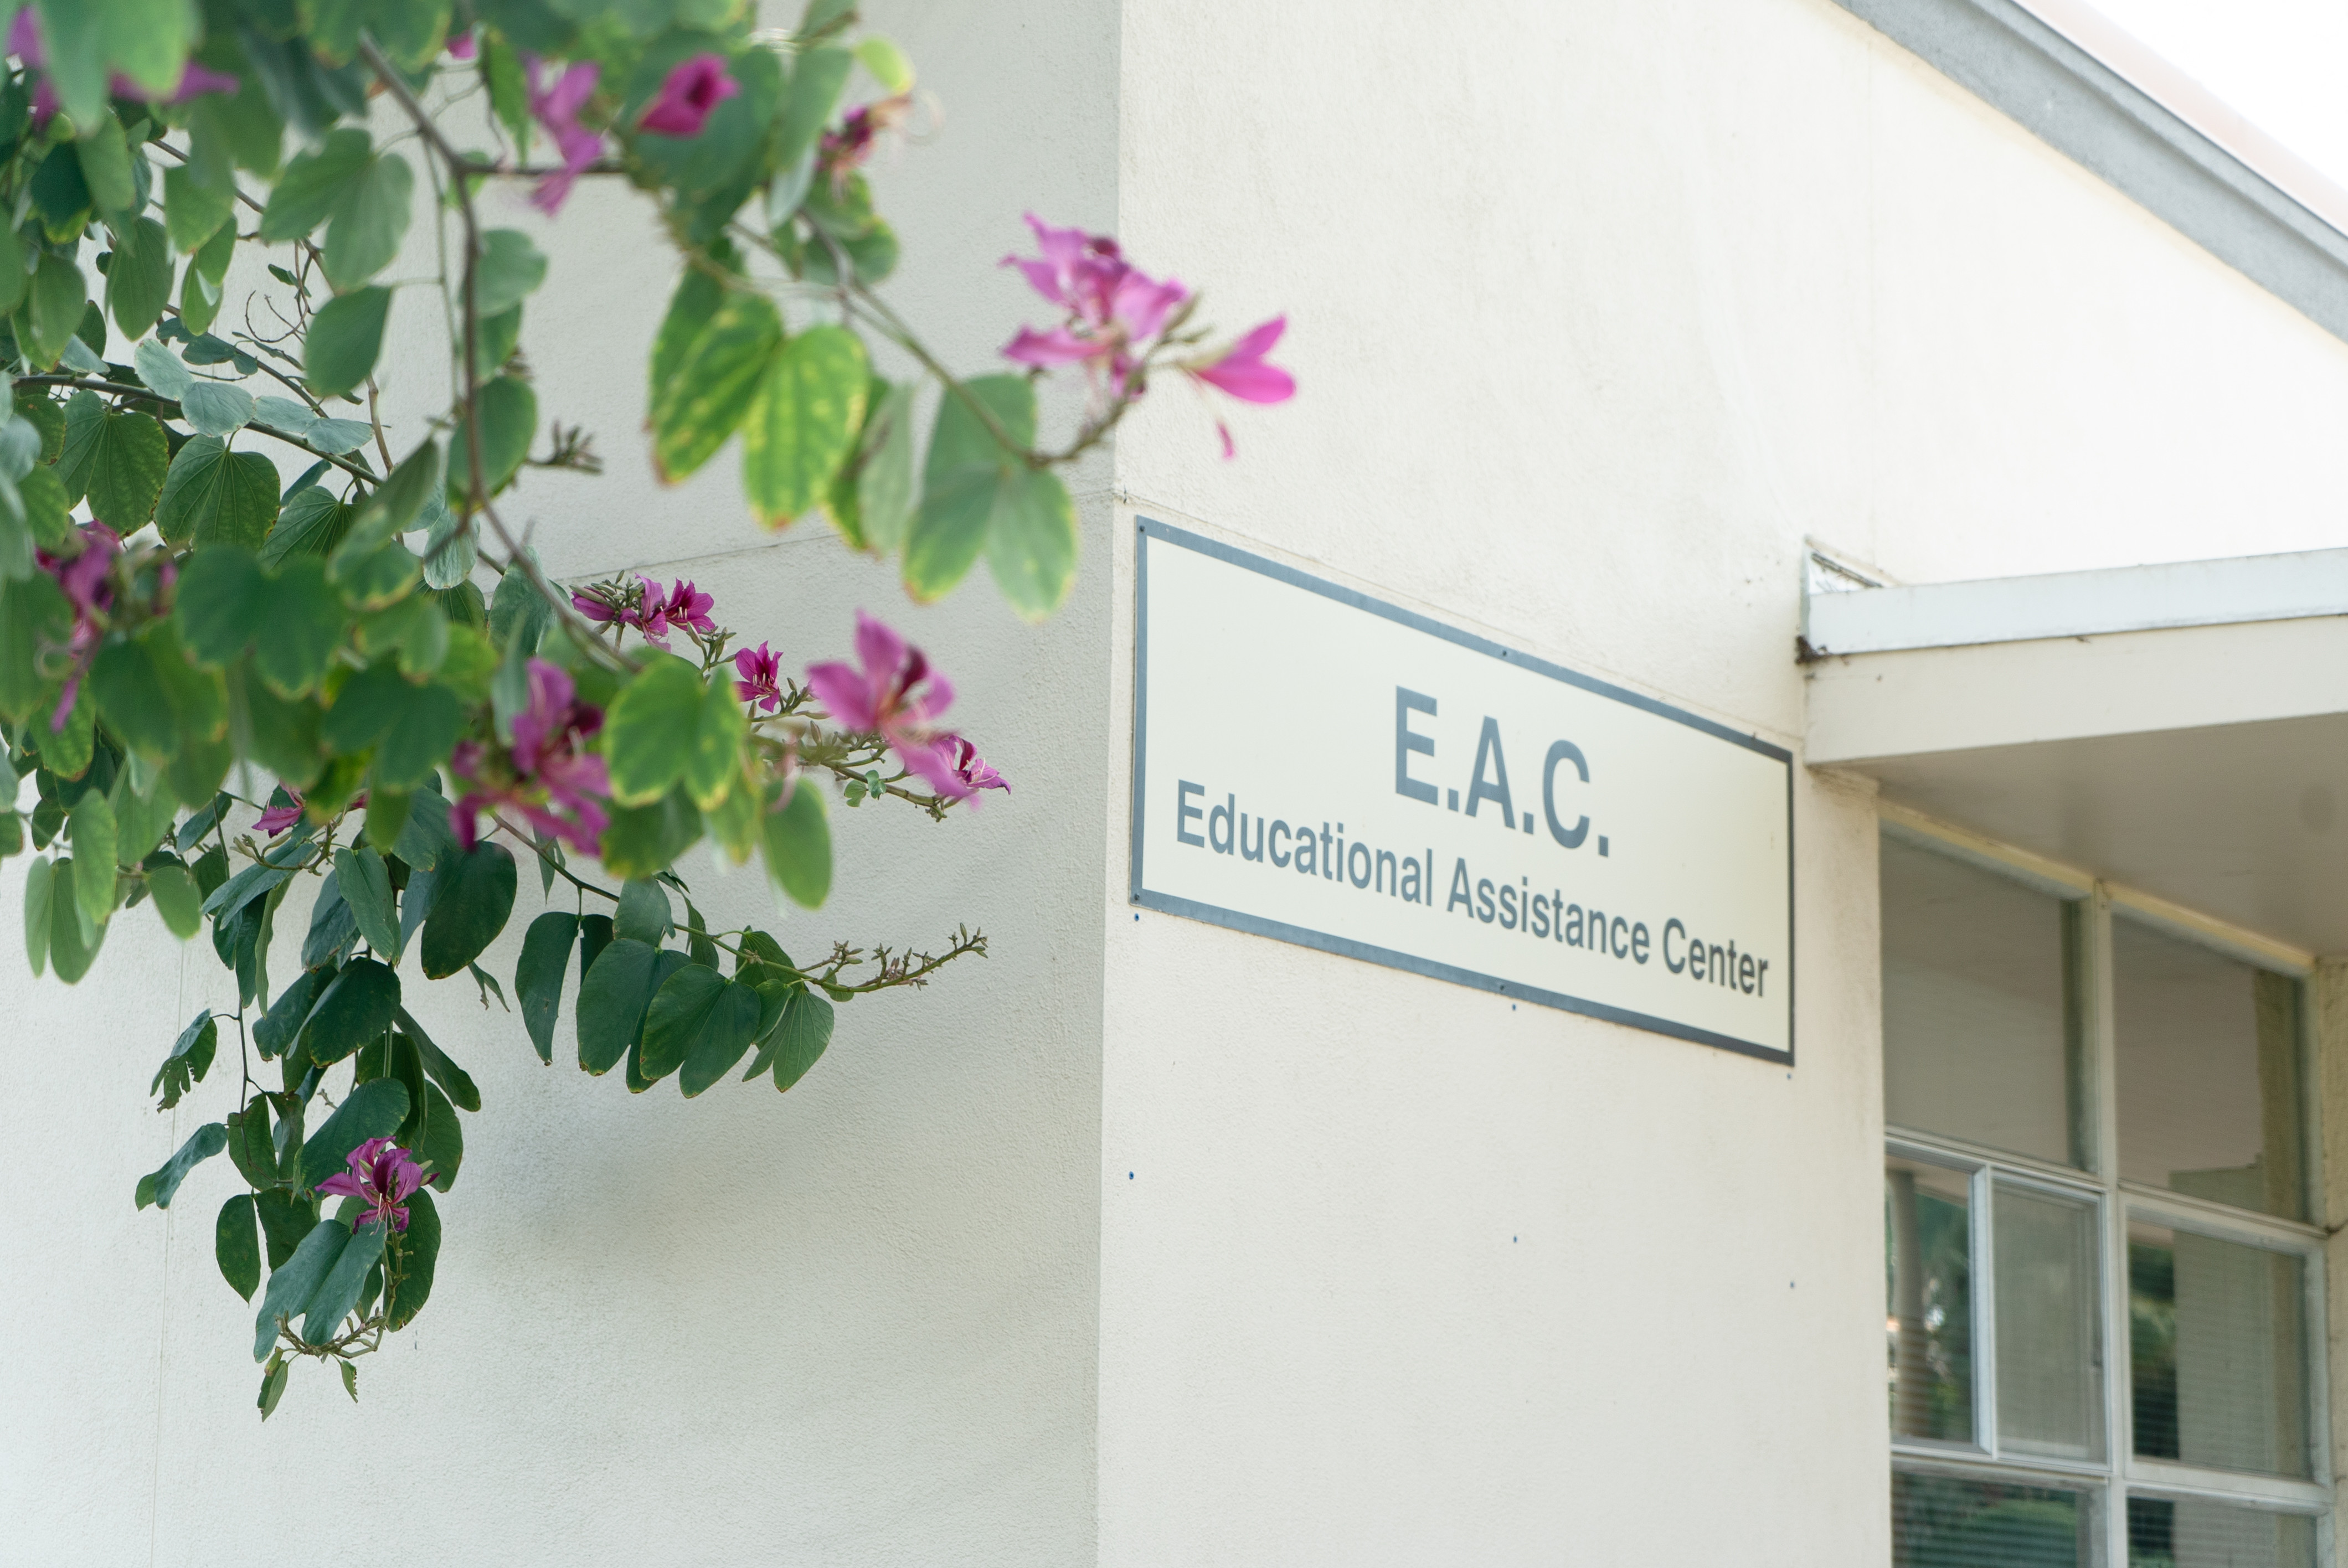 Educational Assistance Center, East WIng of the Administration Building